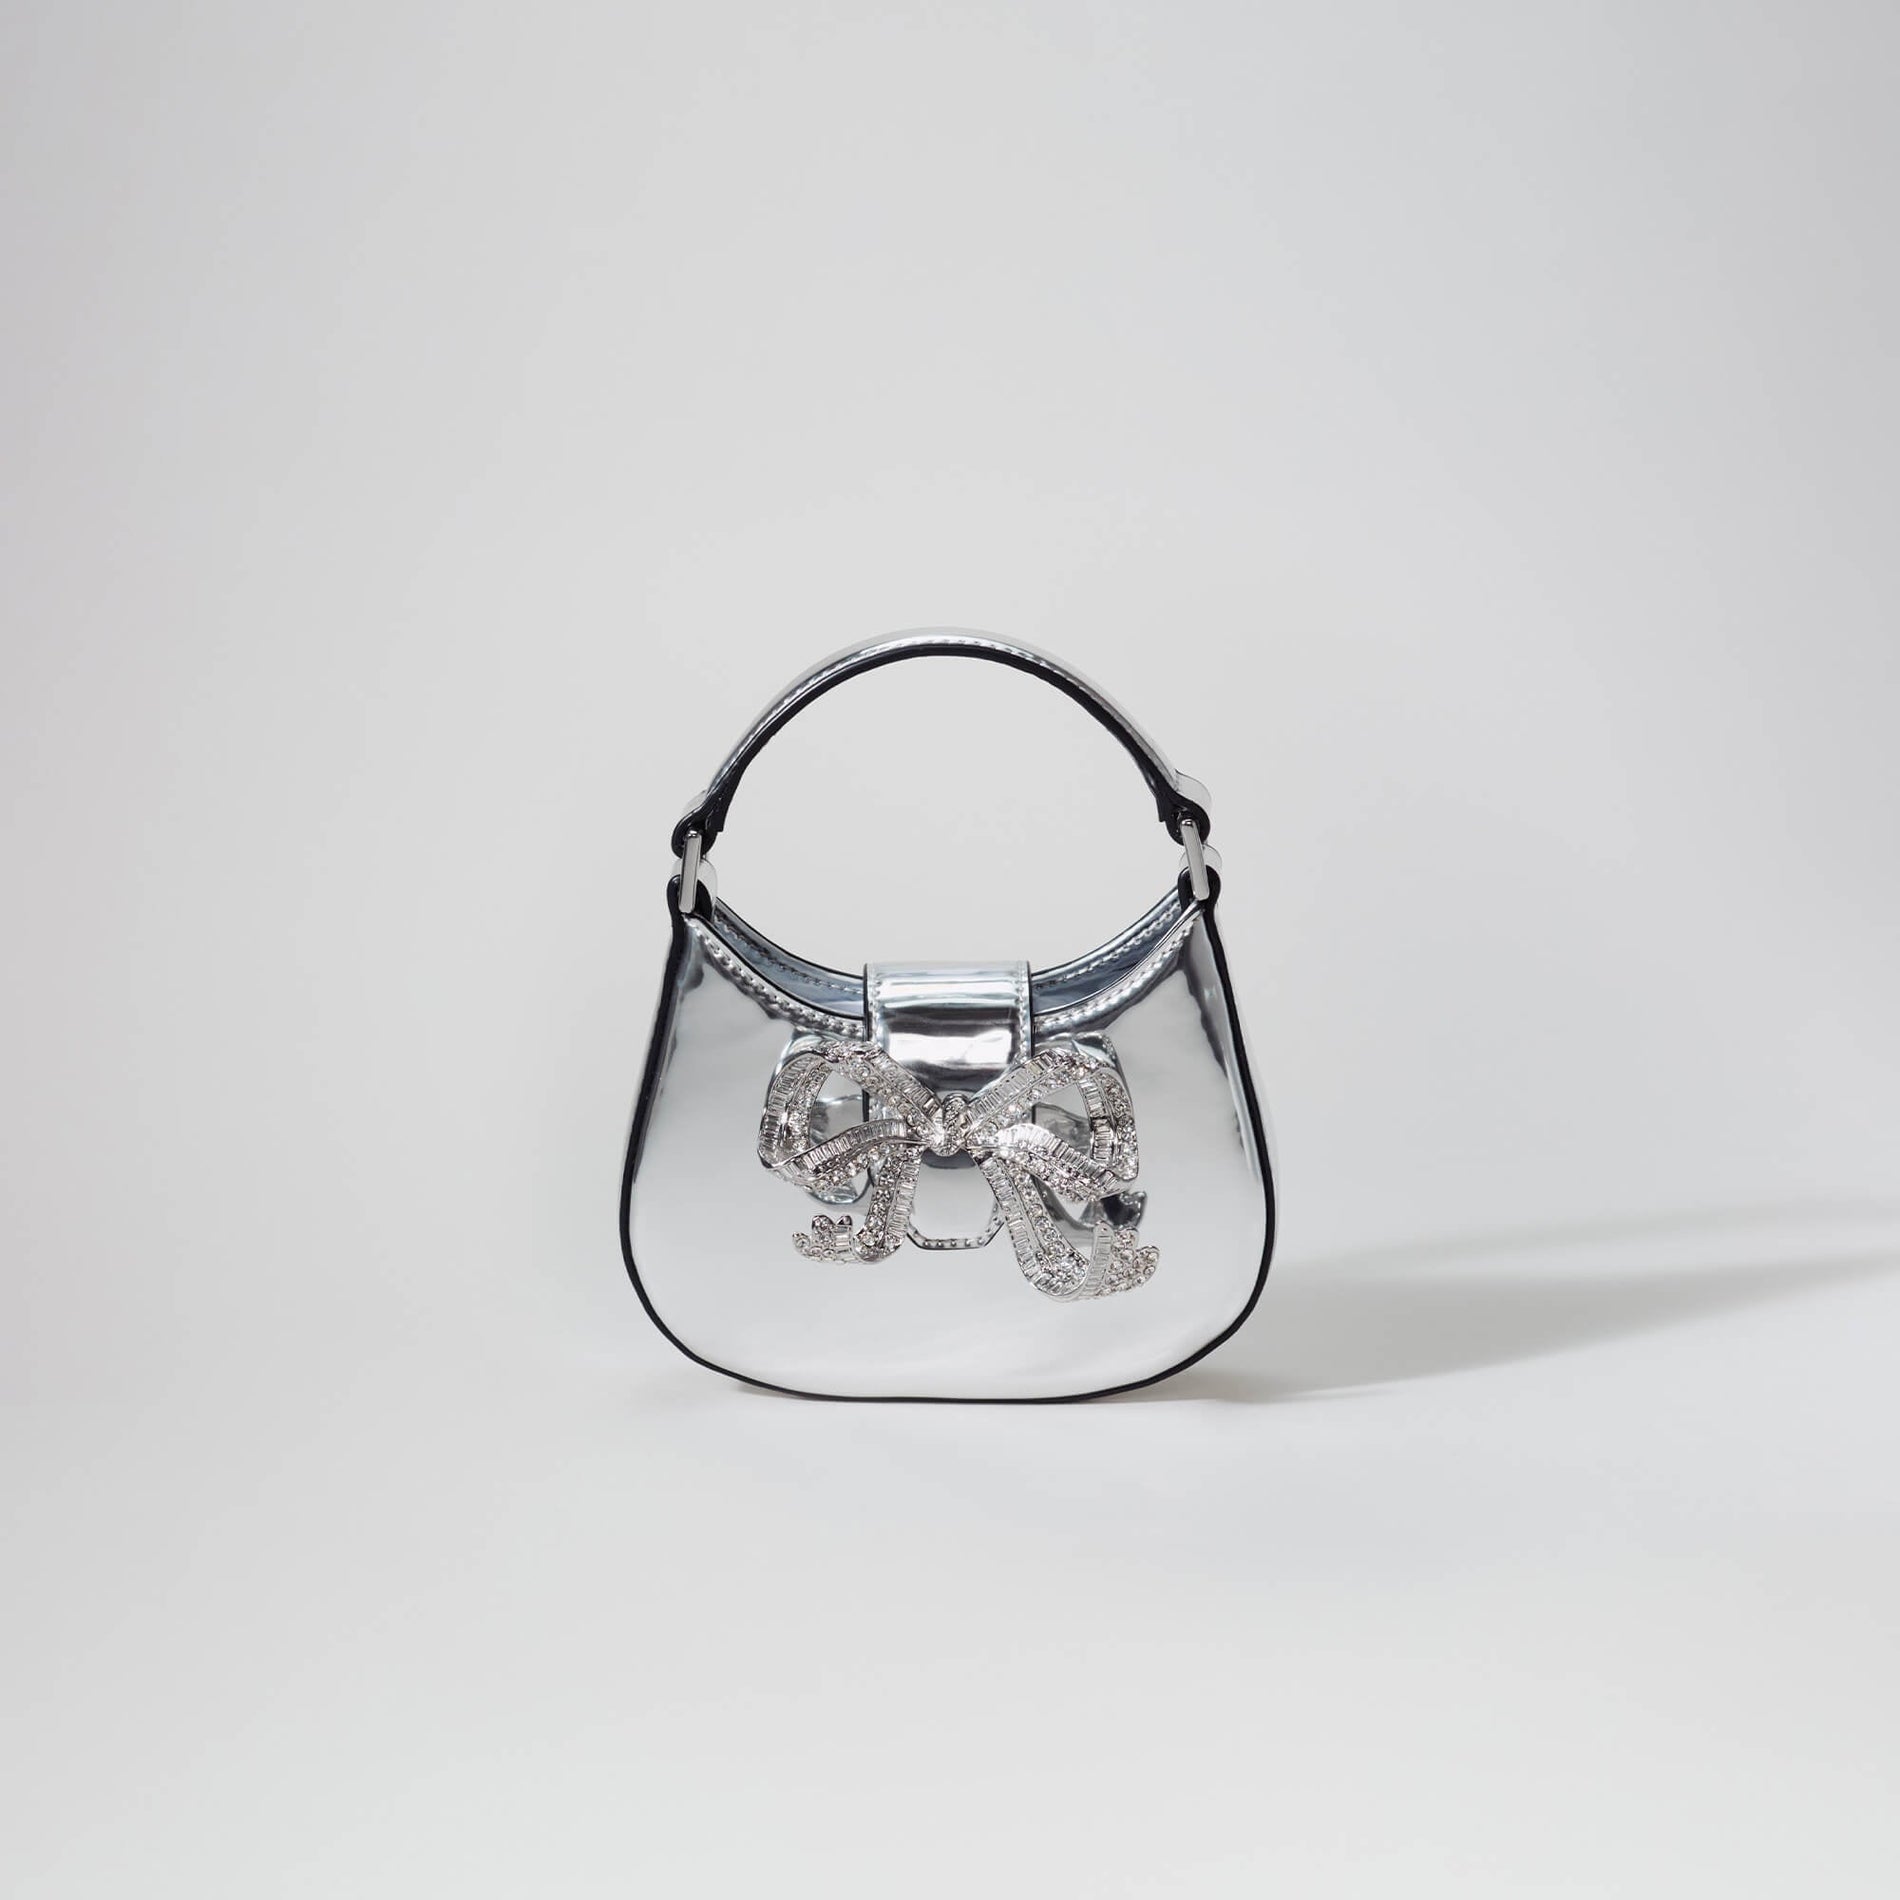 A woman wearing the Silver Crescent Bow Micro Bag